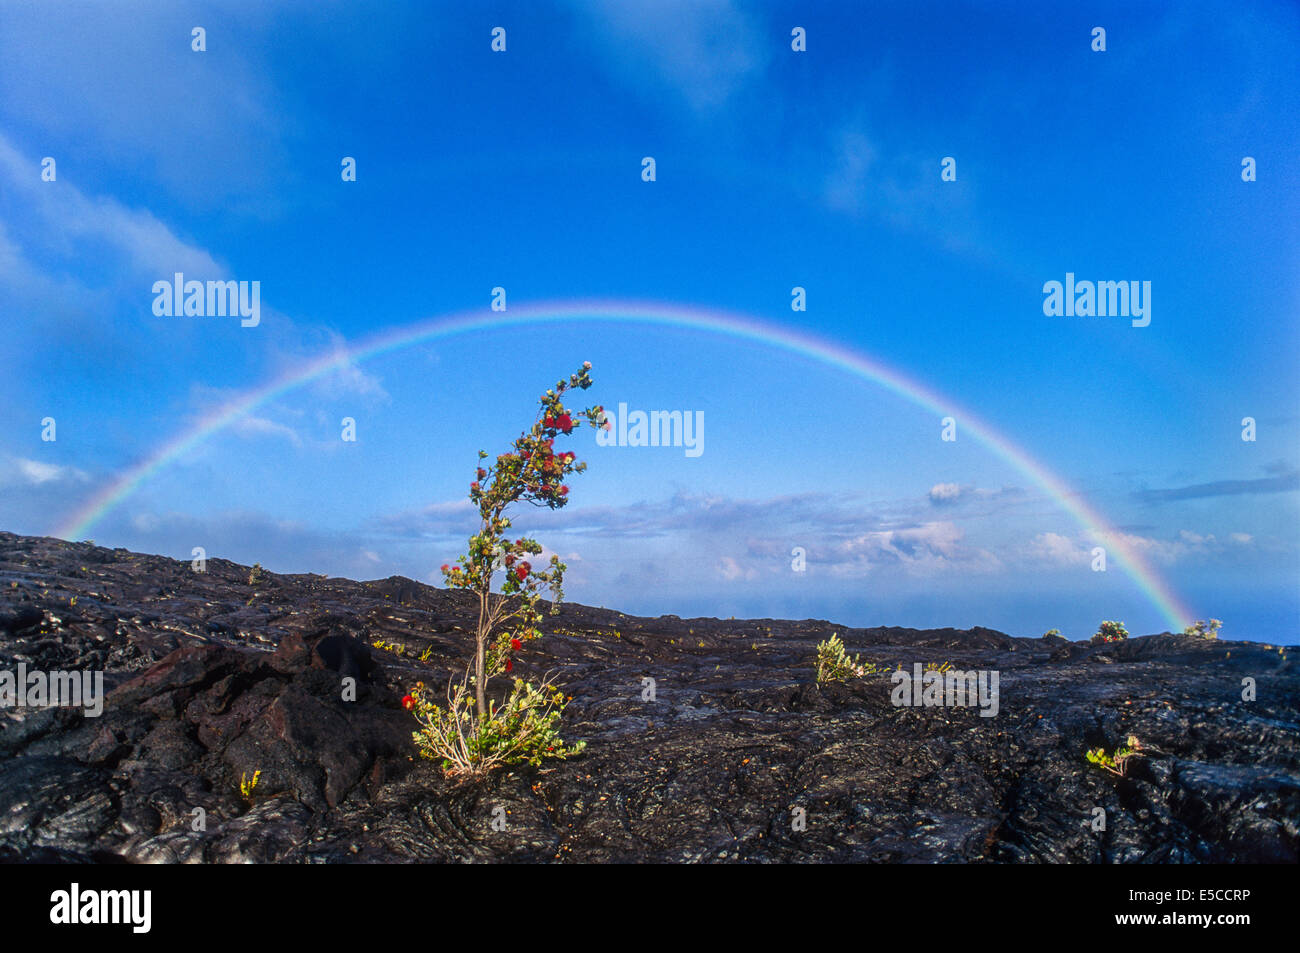 Double rainbow over ohia tree in growing in lava flow; Chain of Craters Road, Hawaii Volcanoes National Park. Stock Photo